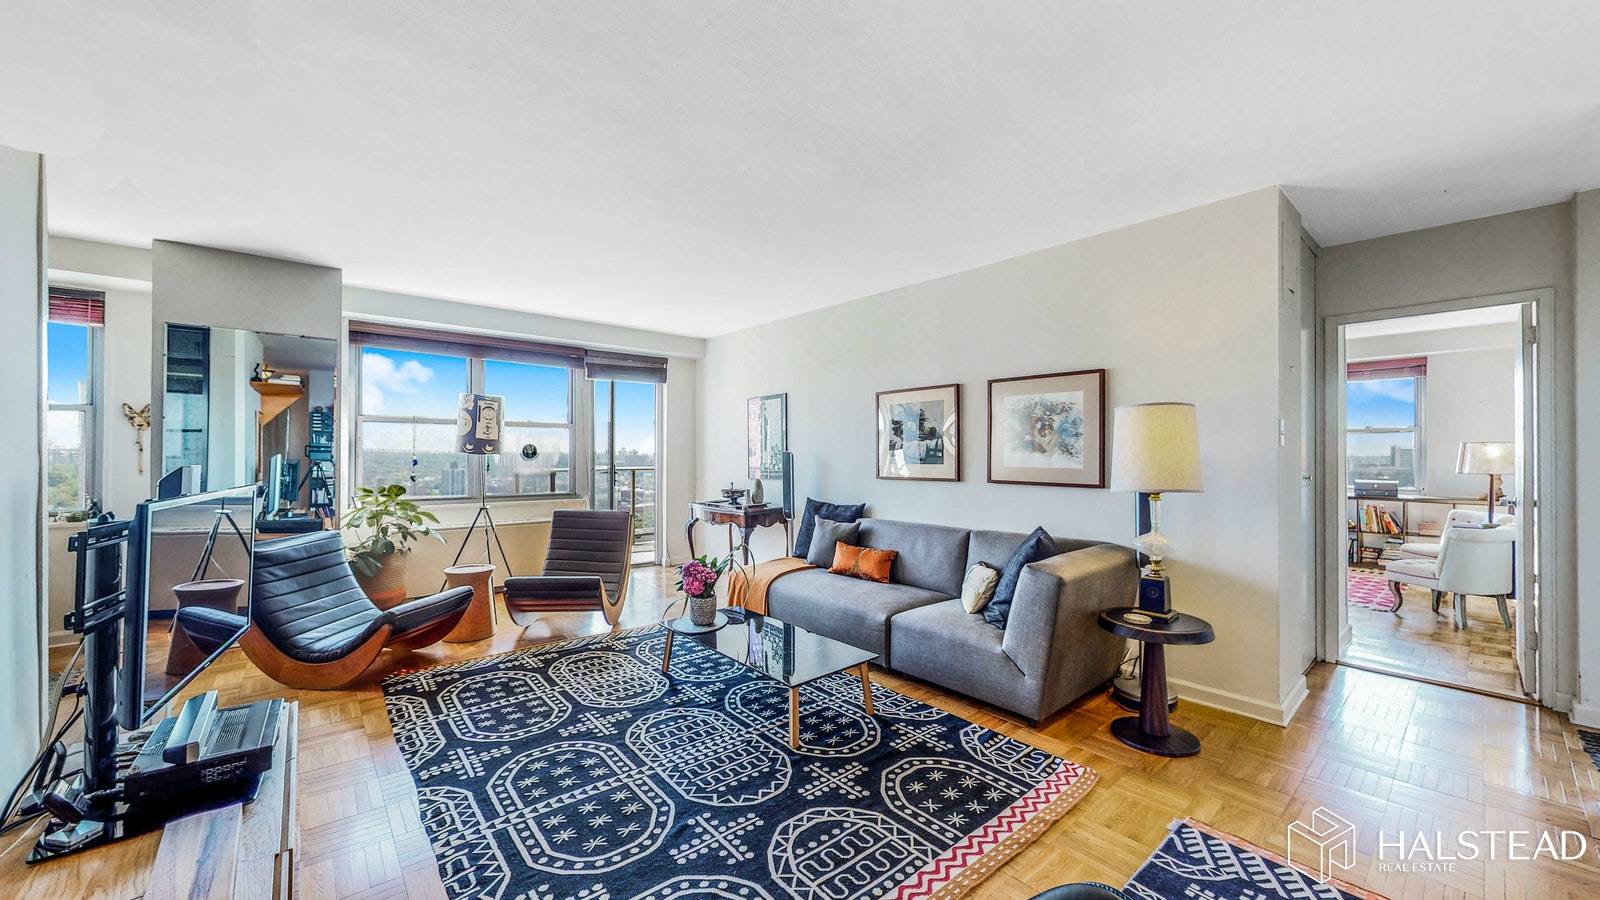 Fantastic two bedroom, two bath renovated coop on the penthouse floor with a terrace.